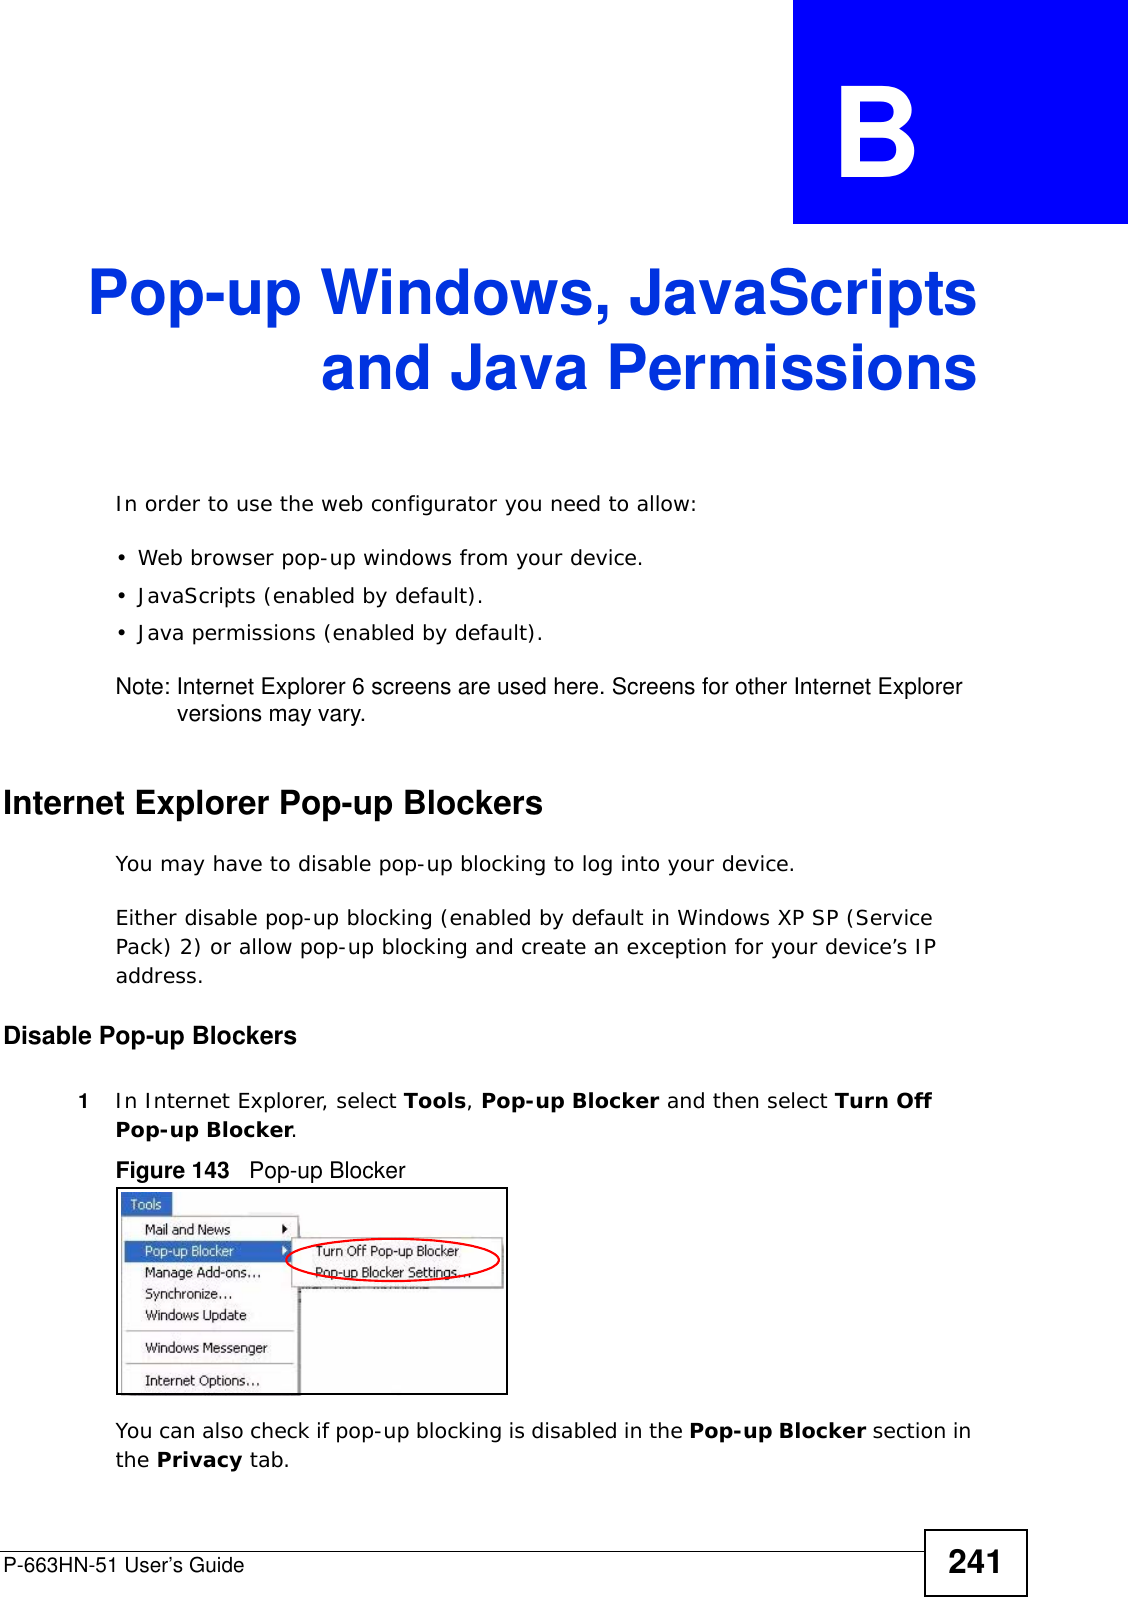 P-663HN-51 User’s Guide 241APPENDIX  B Pop-up Windows, JavaScriptsand Java PermissionsIn order to use the web configurator you need to allow:• Web browser pop-up windows from your device.• JavaScripts (enabled by default).• Java permissions (enabled by default).Note: Internet Explorer 6 screens are used here. Screens for other Internet Explorer versions may vary.Internet Explorer Pop-up BlockersYou may have to disable pop-up blocking to log into your device. Either disable pop-up blocking (enabled by default in Windows XP SP (Service Pack) 2) or allow pop-up blocking and create an exception for your device’s IP address.Disable Pop-up Blockers1In Internet Explorer, select Tools, Pop-up Blocker and then select Turn Off Pop-up Blocker. Figure 143   Pop-up BlockerYou can also check if pop-up blocking is disabled in the Pop-up Blocker section in the Privacy tab. 